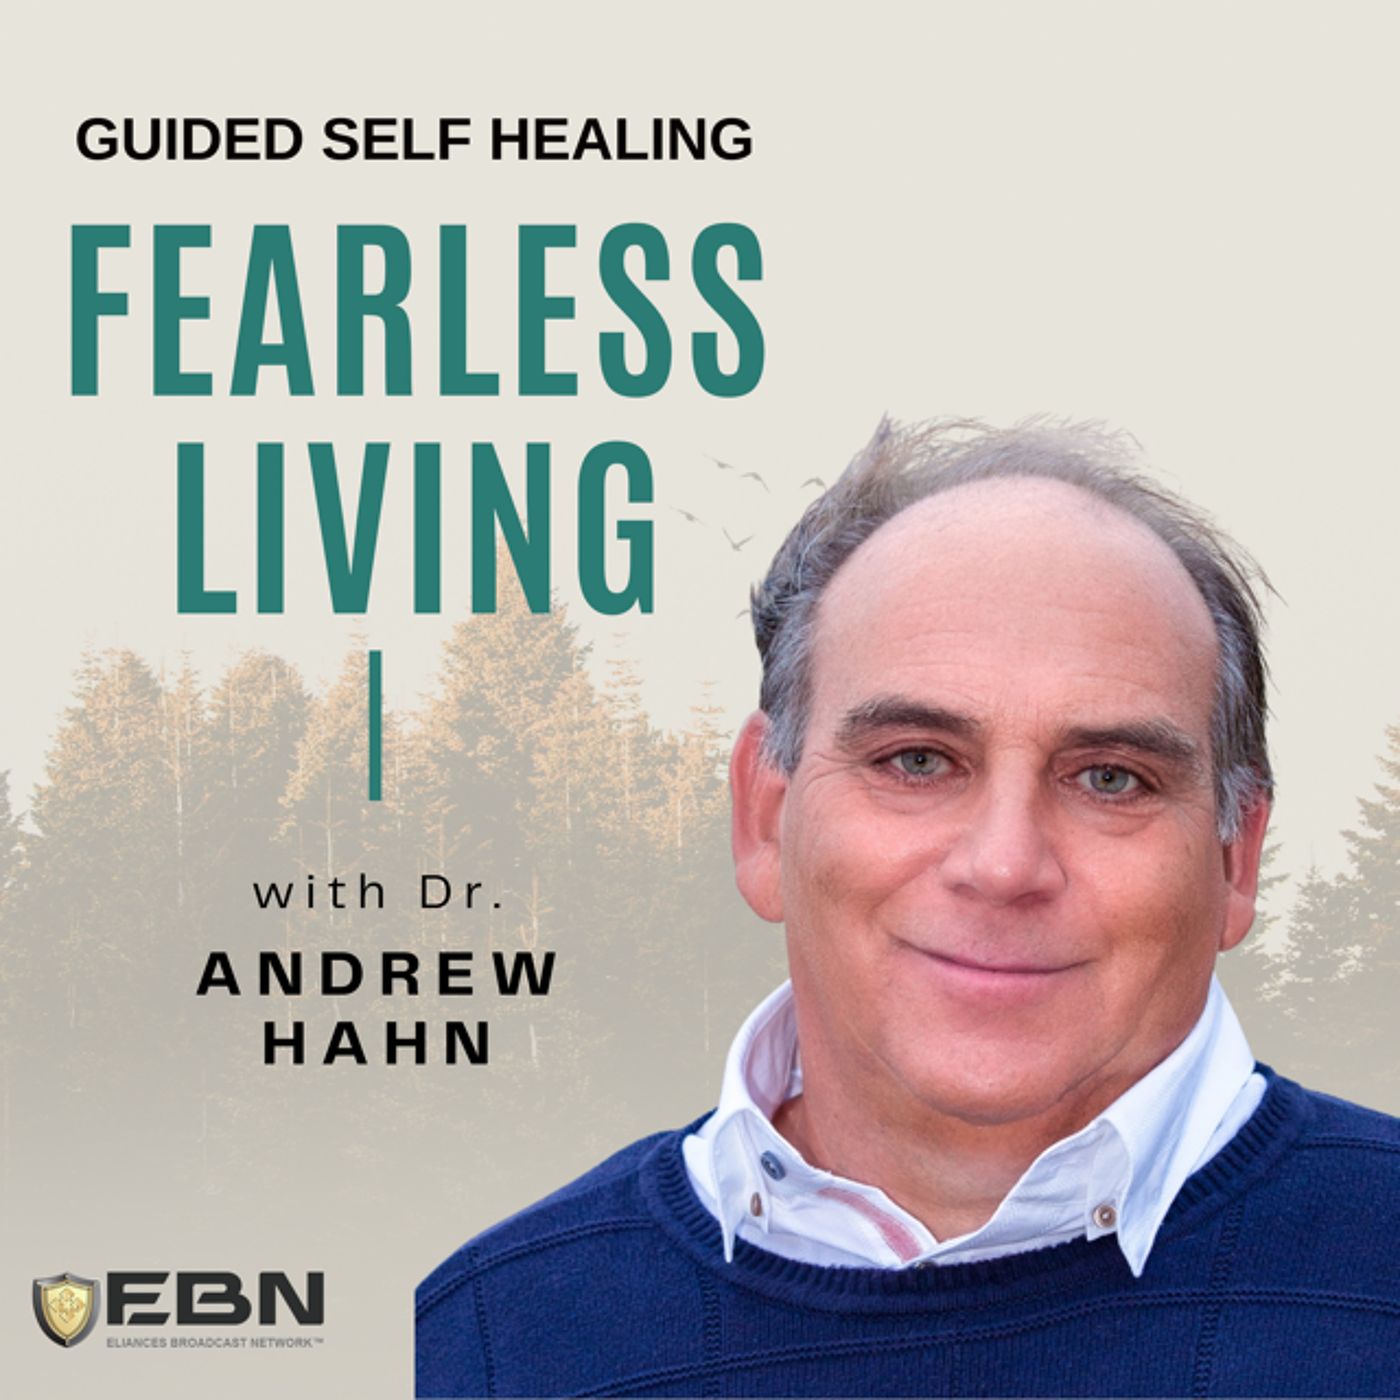 Andy Hahn, Fearless Living, Healing ALS Image